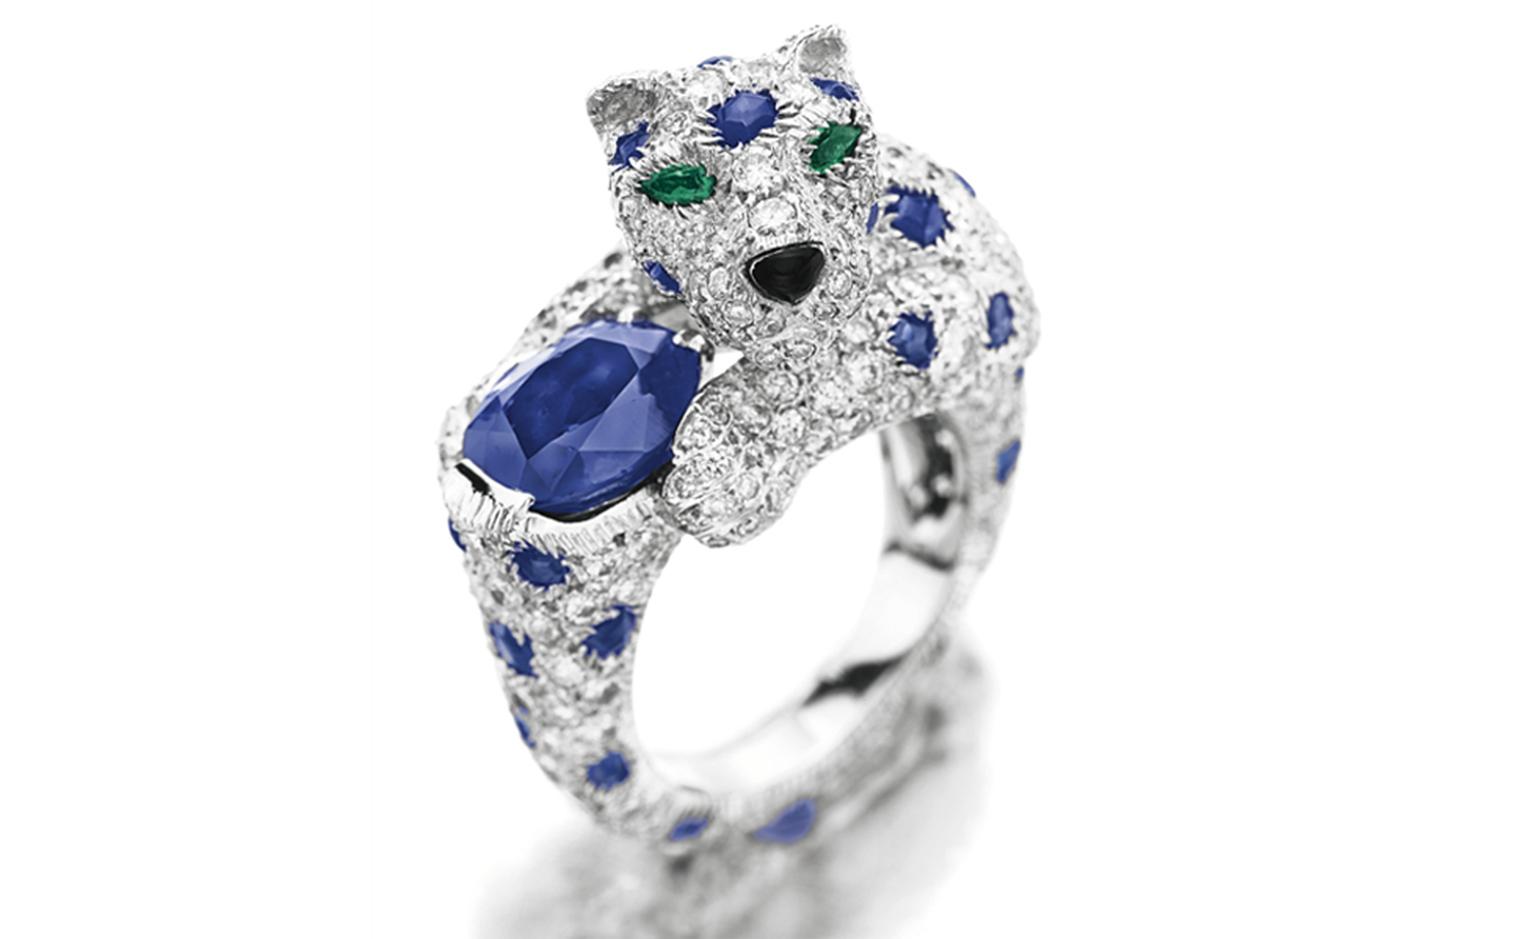 Lot 78. A diamond sapphire and emerald ''panther'' ring, by Cartier. Estimate 20,000 - 30,000 U.S. dollarsLot 78. A diamond sapphire and emerald ''Panther'' ring, by Cartier. Estimate 20,000 - 30,000 U.S. dollars. SOLD FOR $122,500